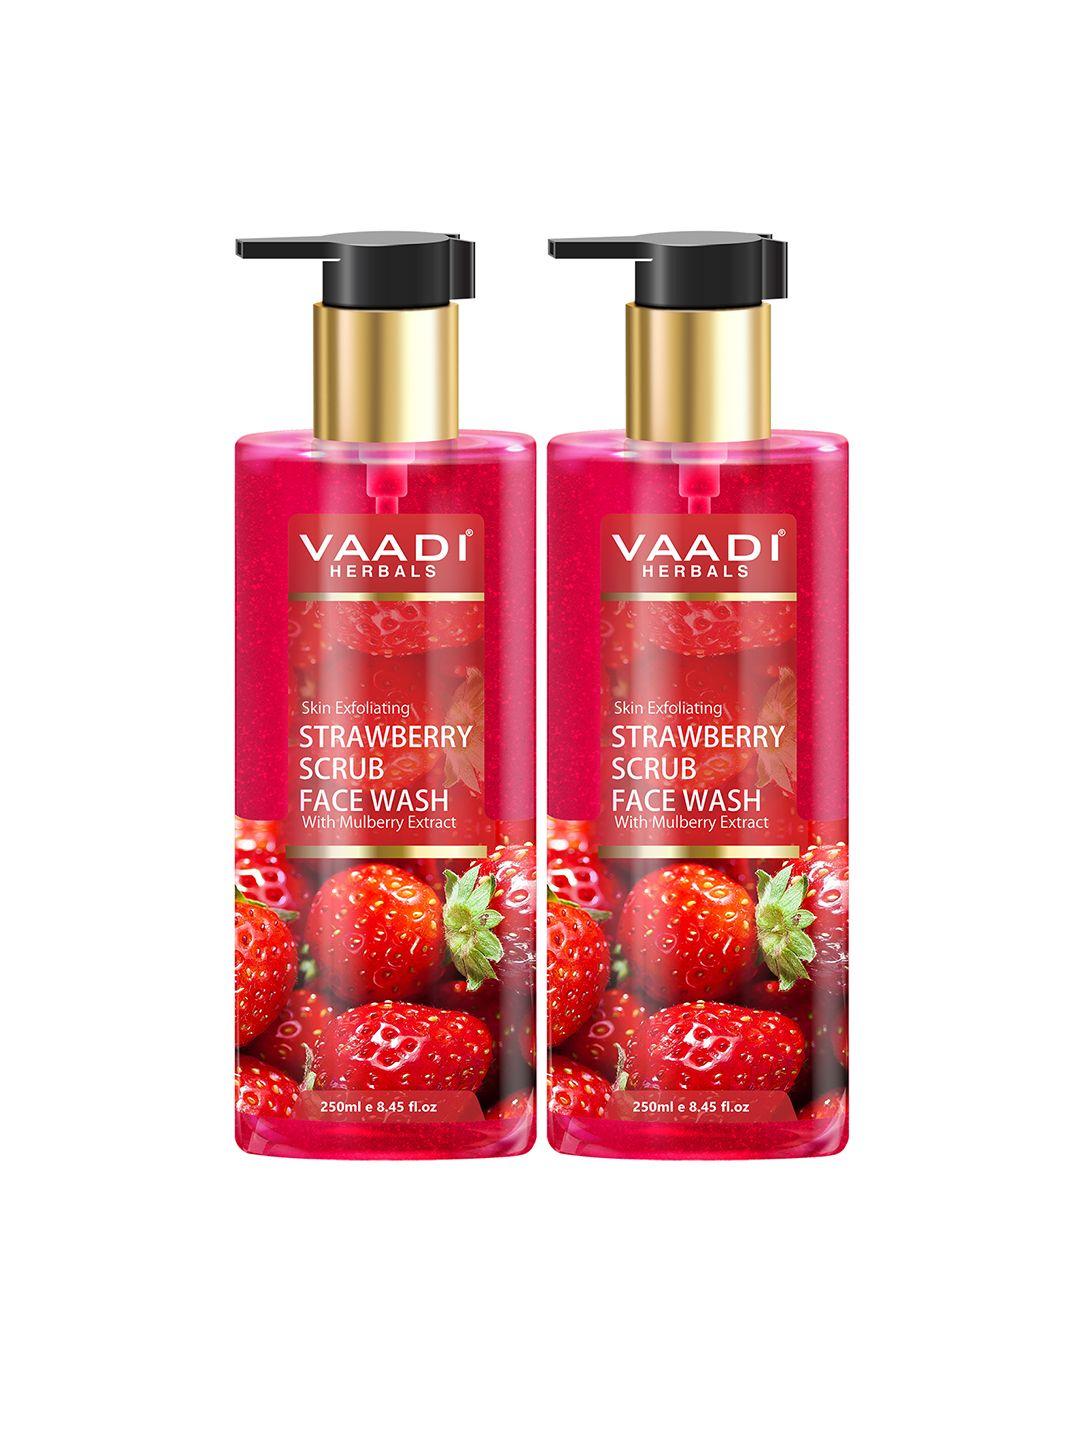 vaadi herbals set of 2 strawberry scrub face wash with mulberry extract - 250ml each